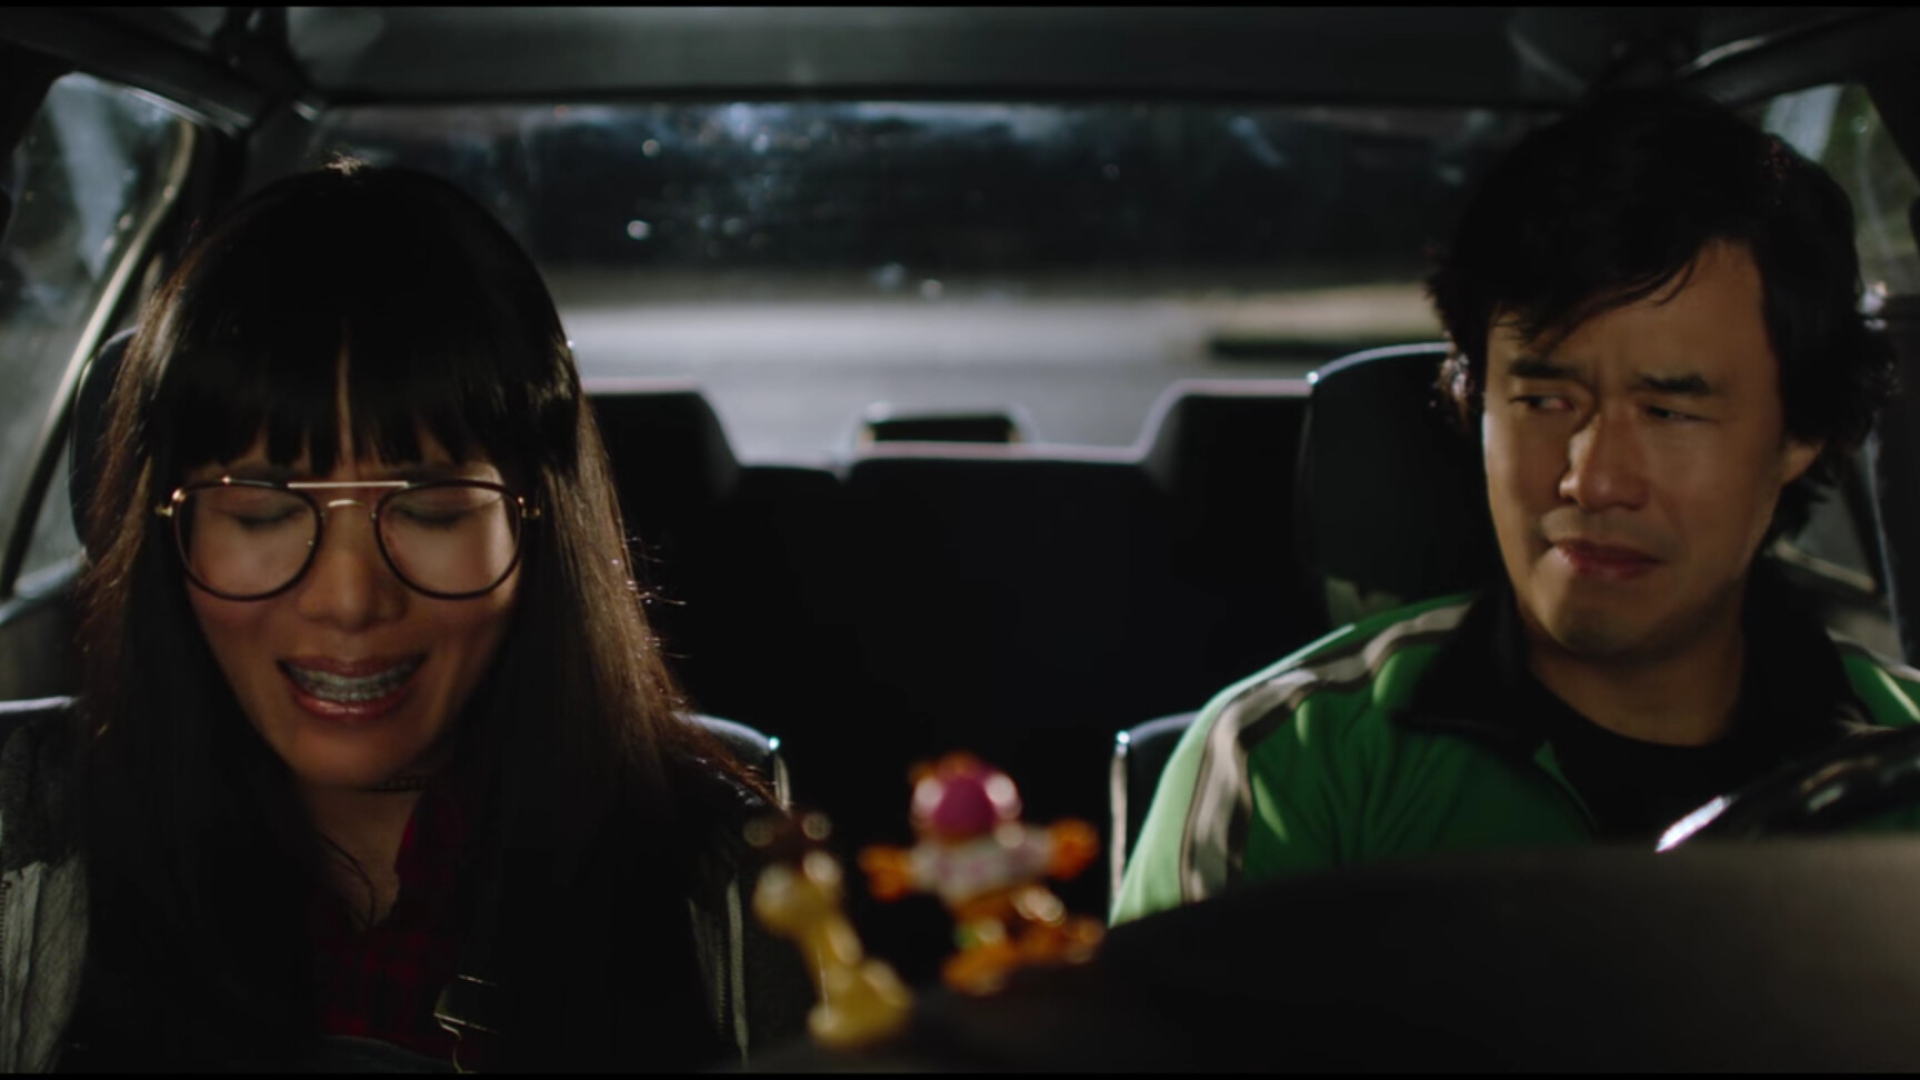 Always Be My Maybe: Ali Wong and Randall Park's movie, TV director Nahnatchka Khan, Comedy, Park and Wong as childhood friends. 1920x1080 Full HD Wallpaper.